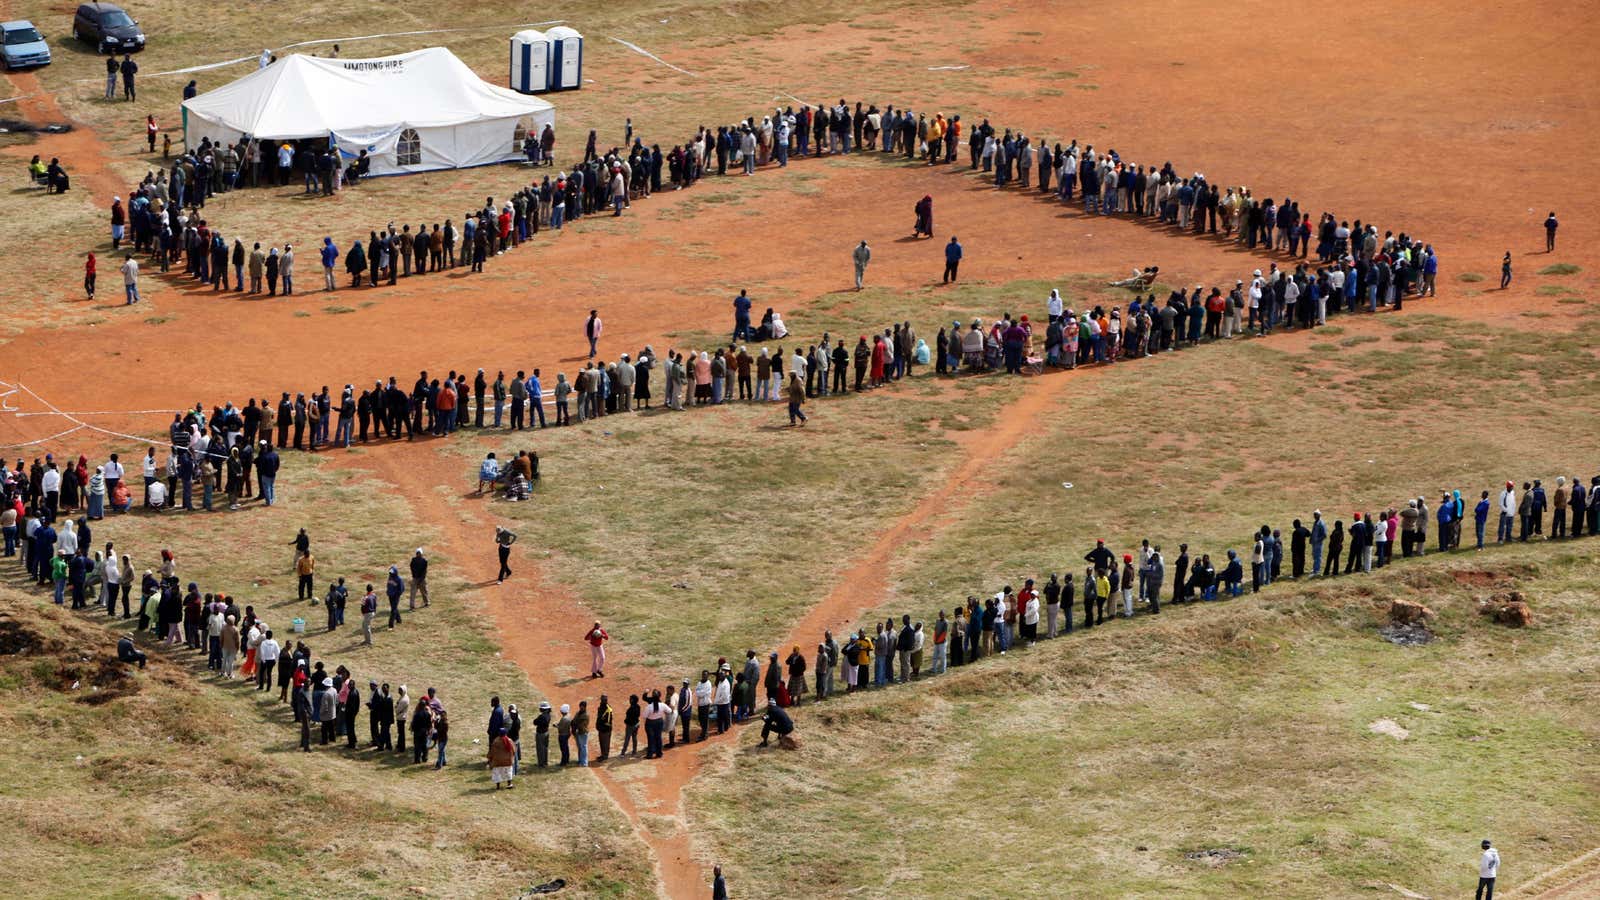 South Africans would line up to choose a new leader.